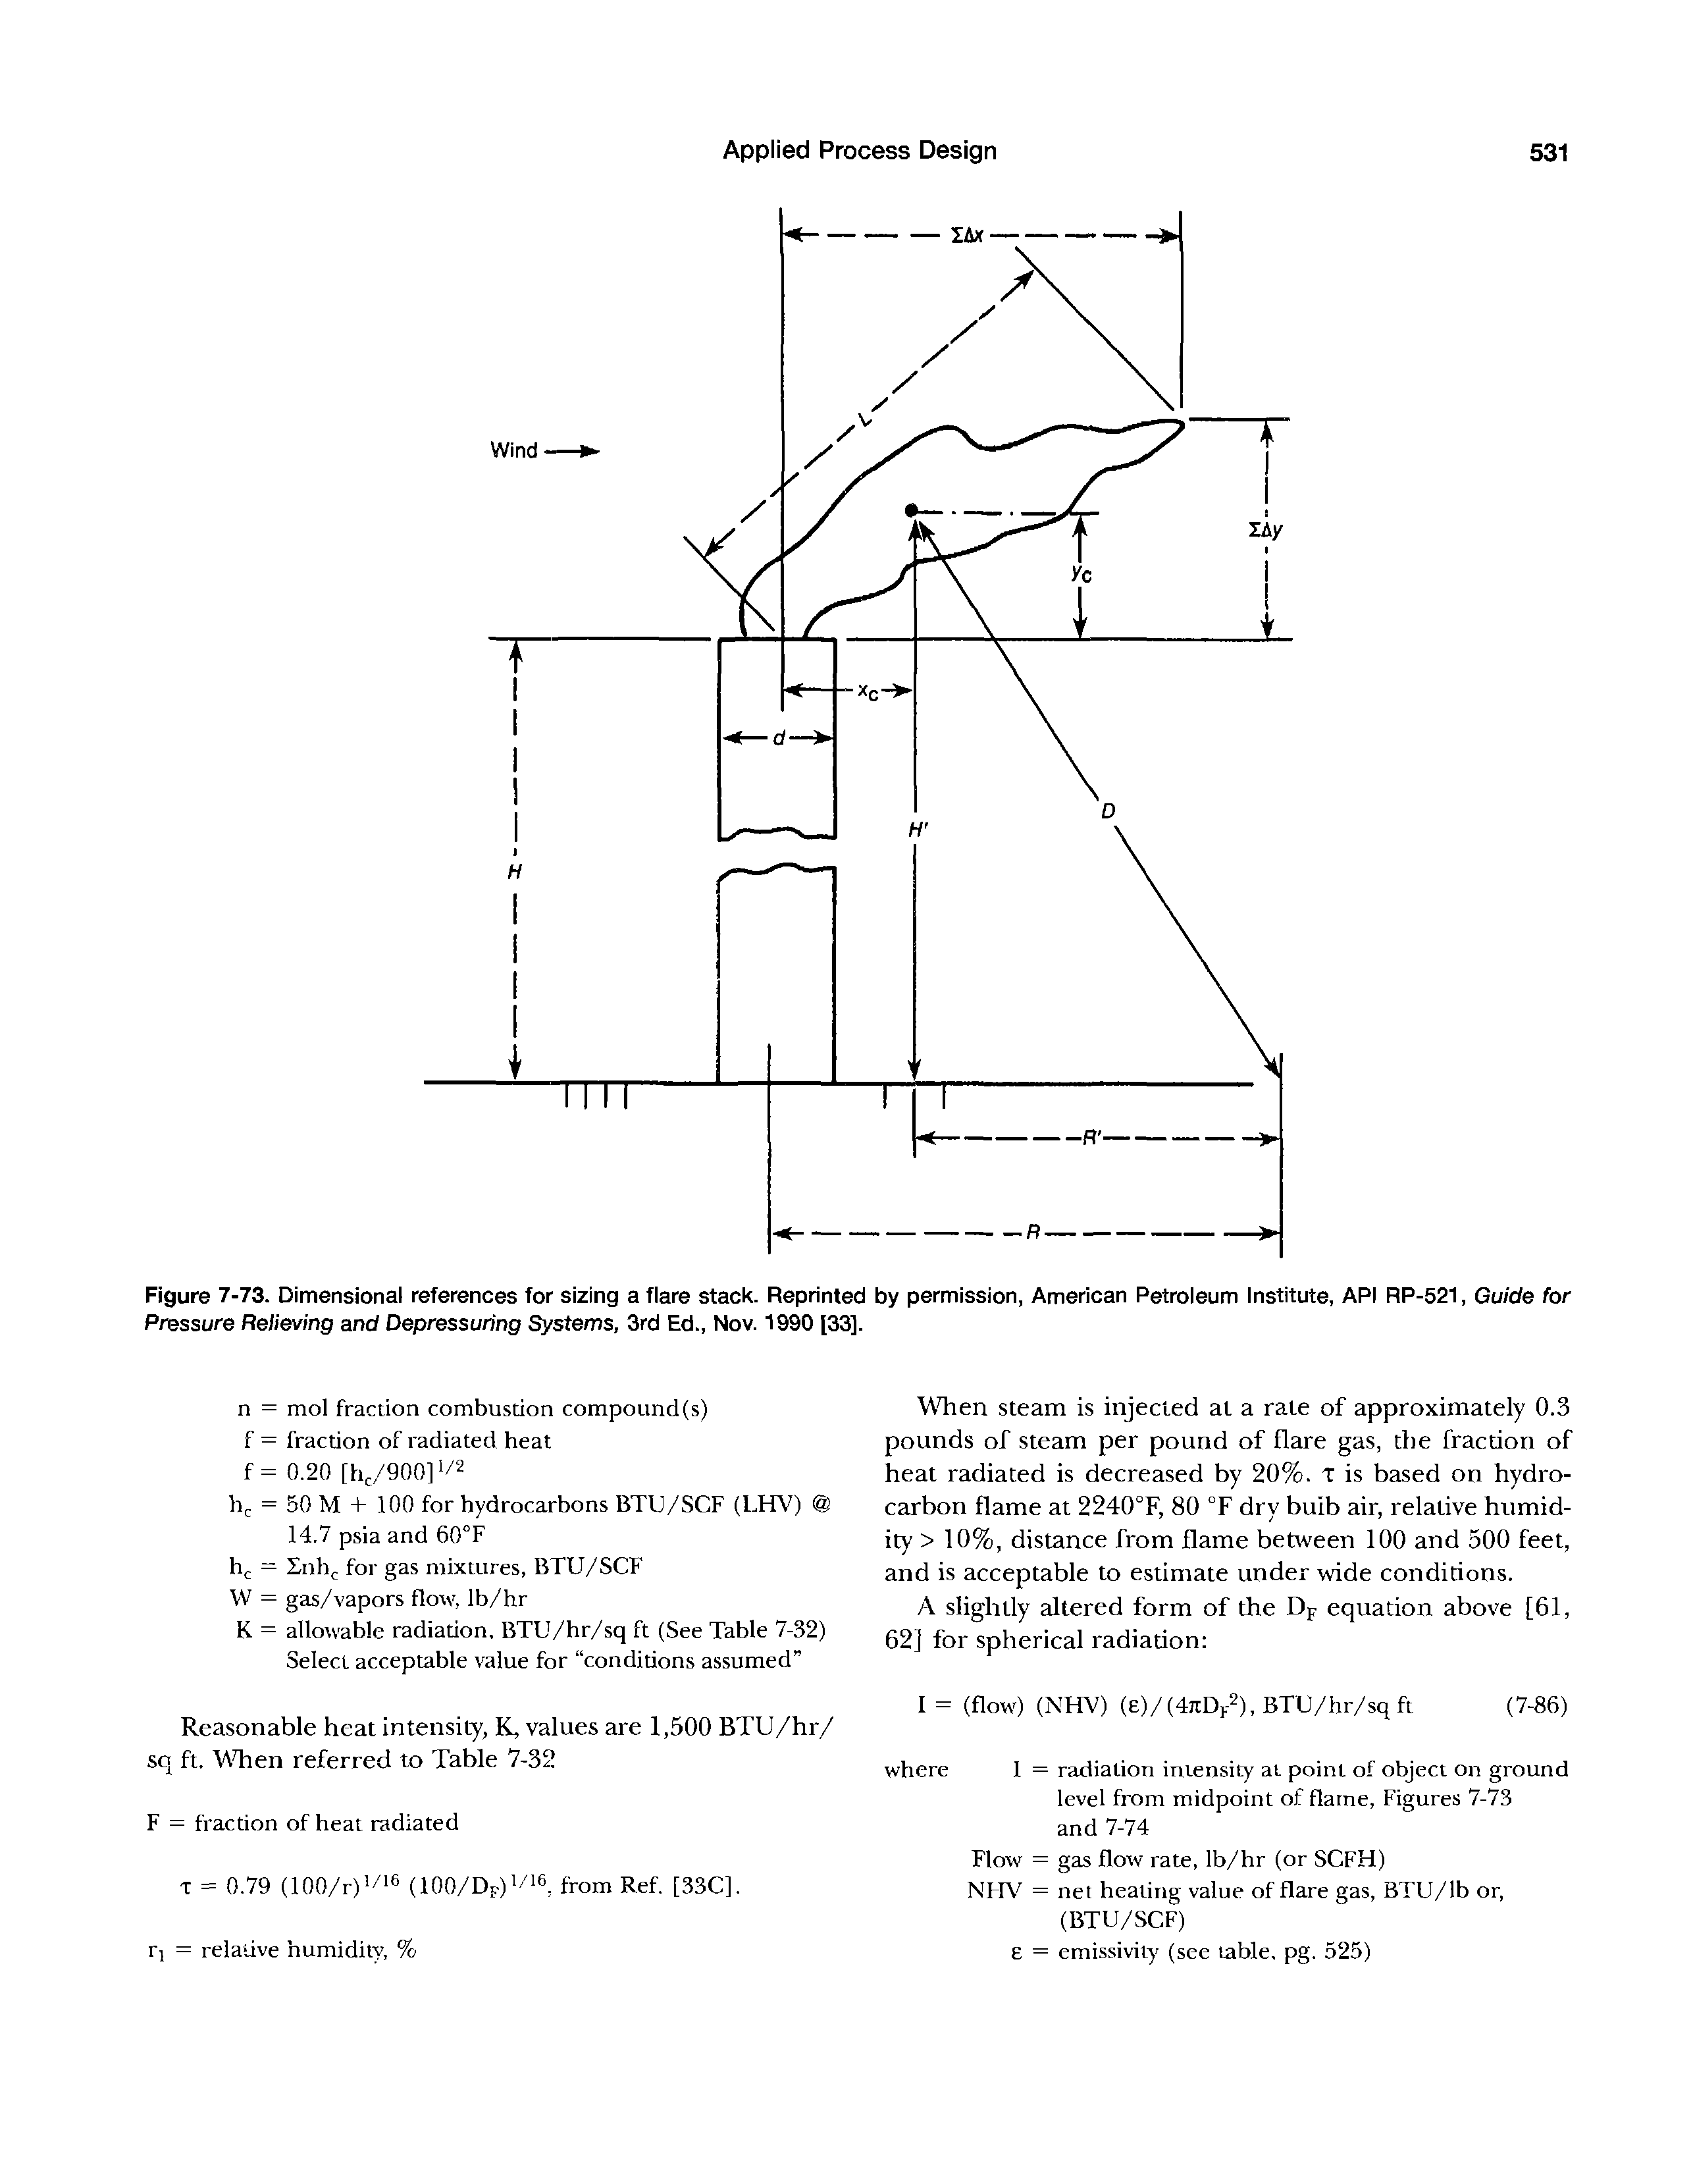 Figure 7-73. Dimensional references for sizing a flare stack. Reprinted by permission, American Petroleum Institute, API RP-521, Guide for Pressure Relieving and Depressuring Systems, 3rd Ed., Nov. 1990 [33].